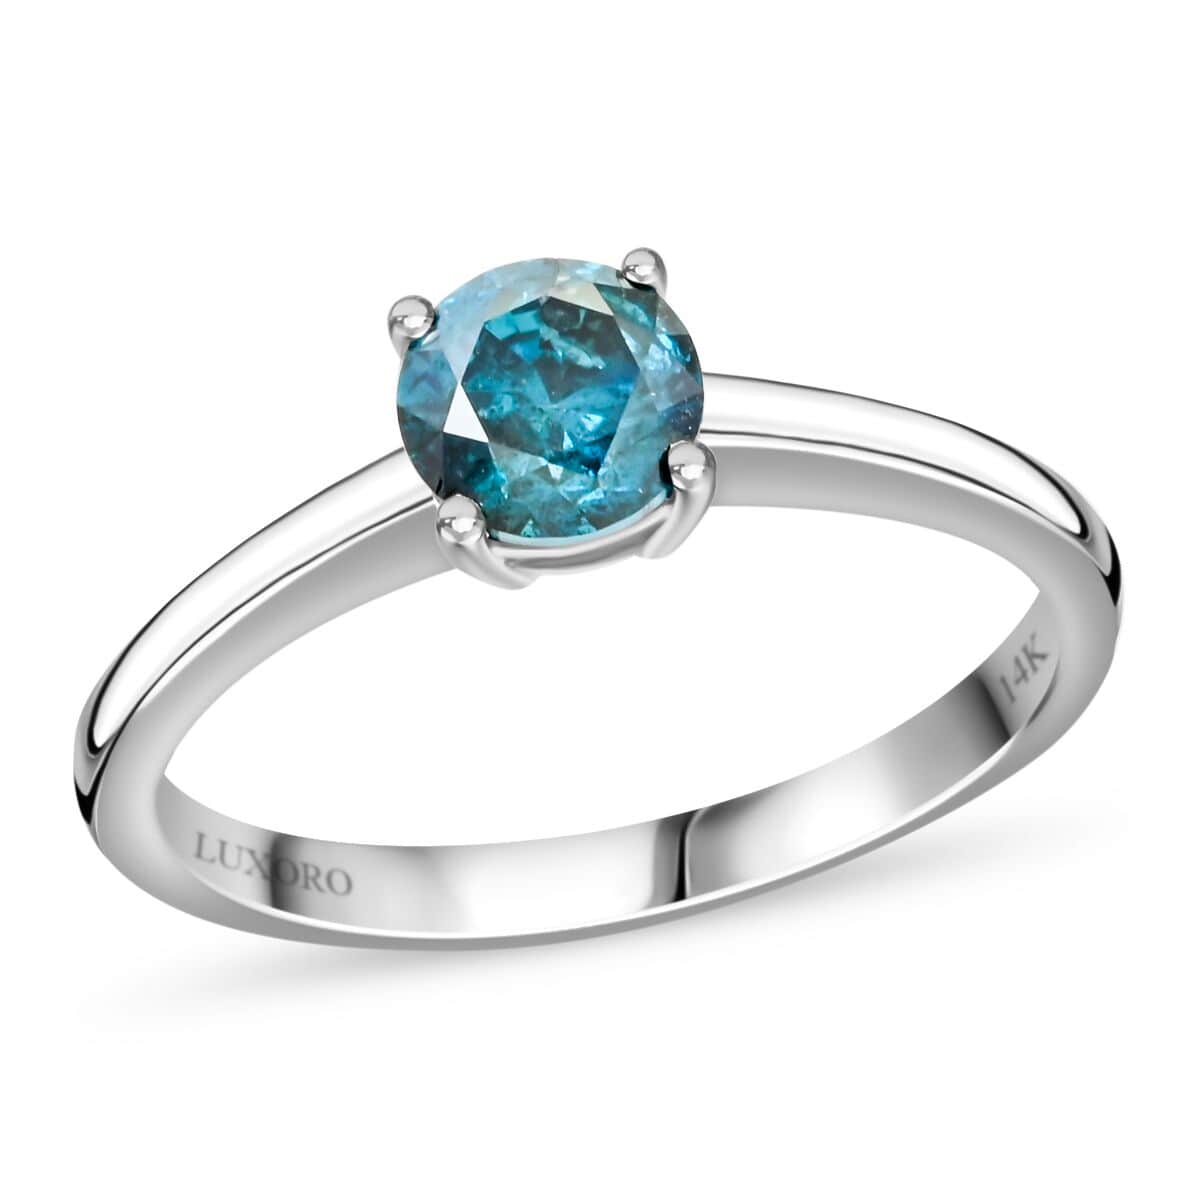 Luxoro 14K White Gold Venice Blue Diamond I1-I2 Solitaire Ring (Size 9.0) 1.00 ctw image number 0